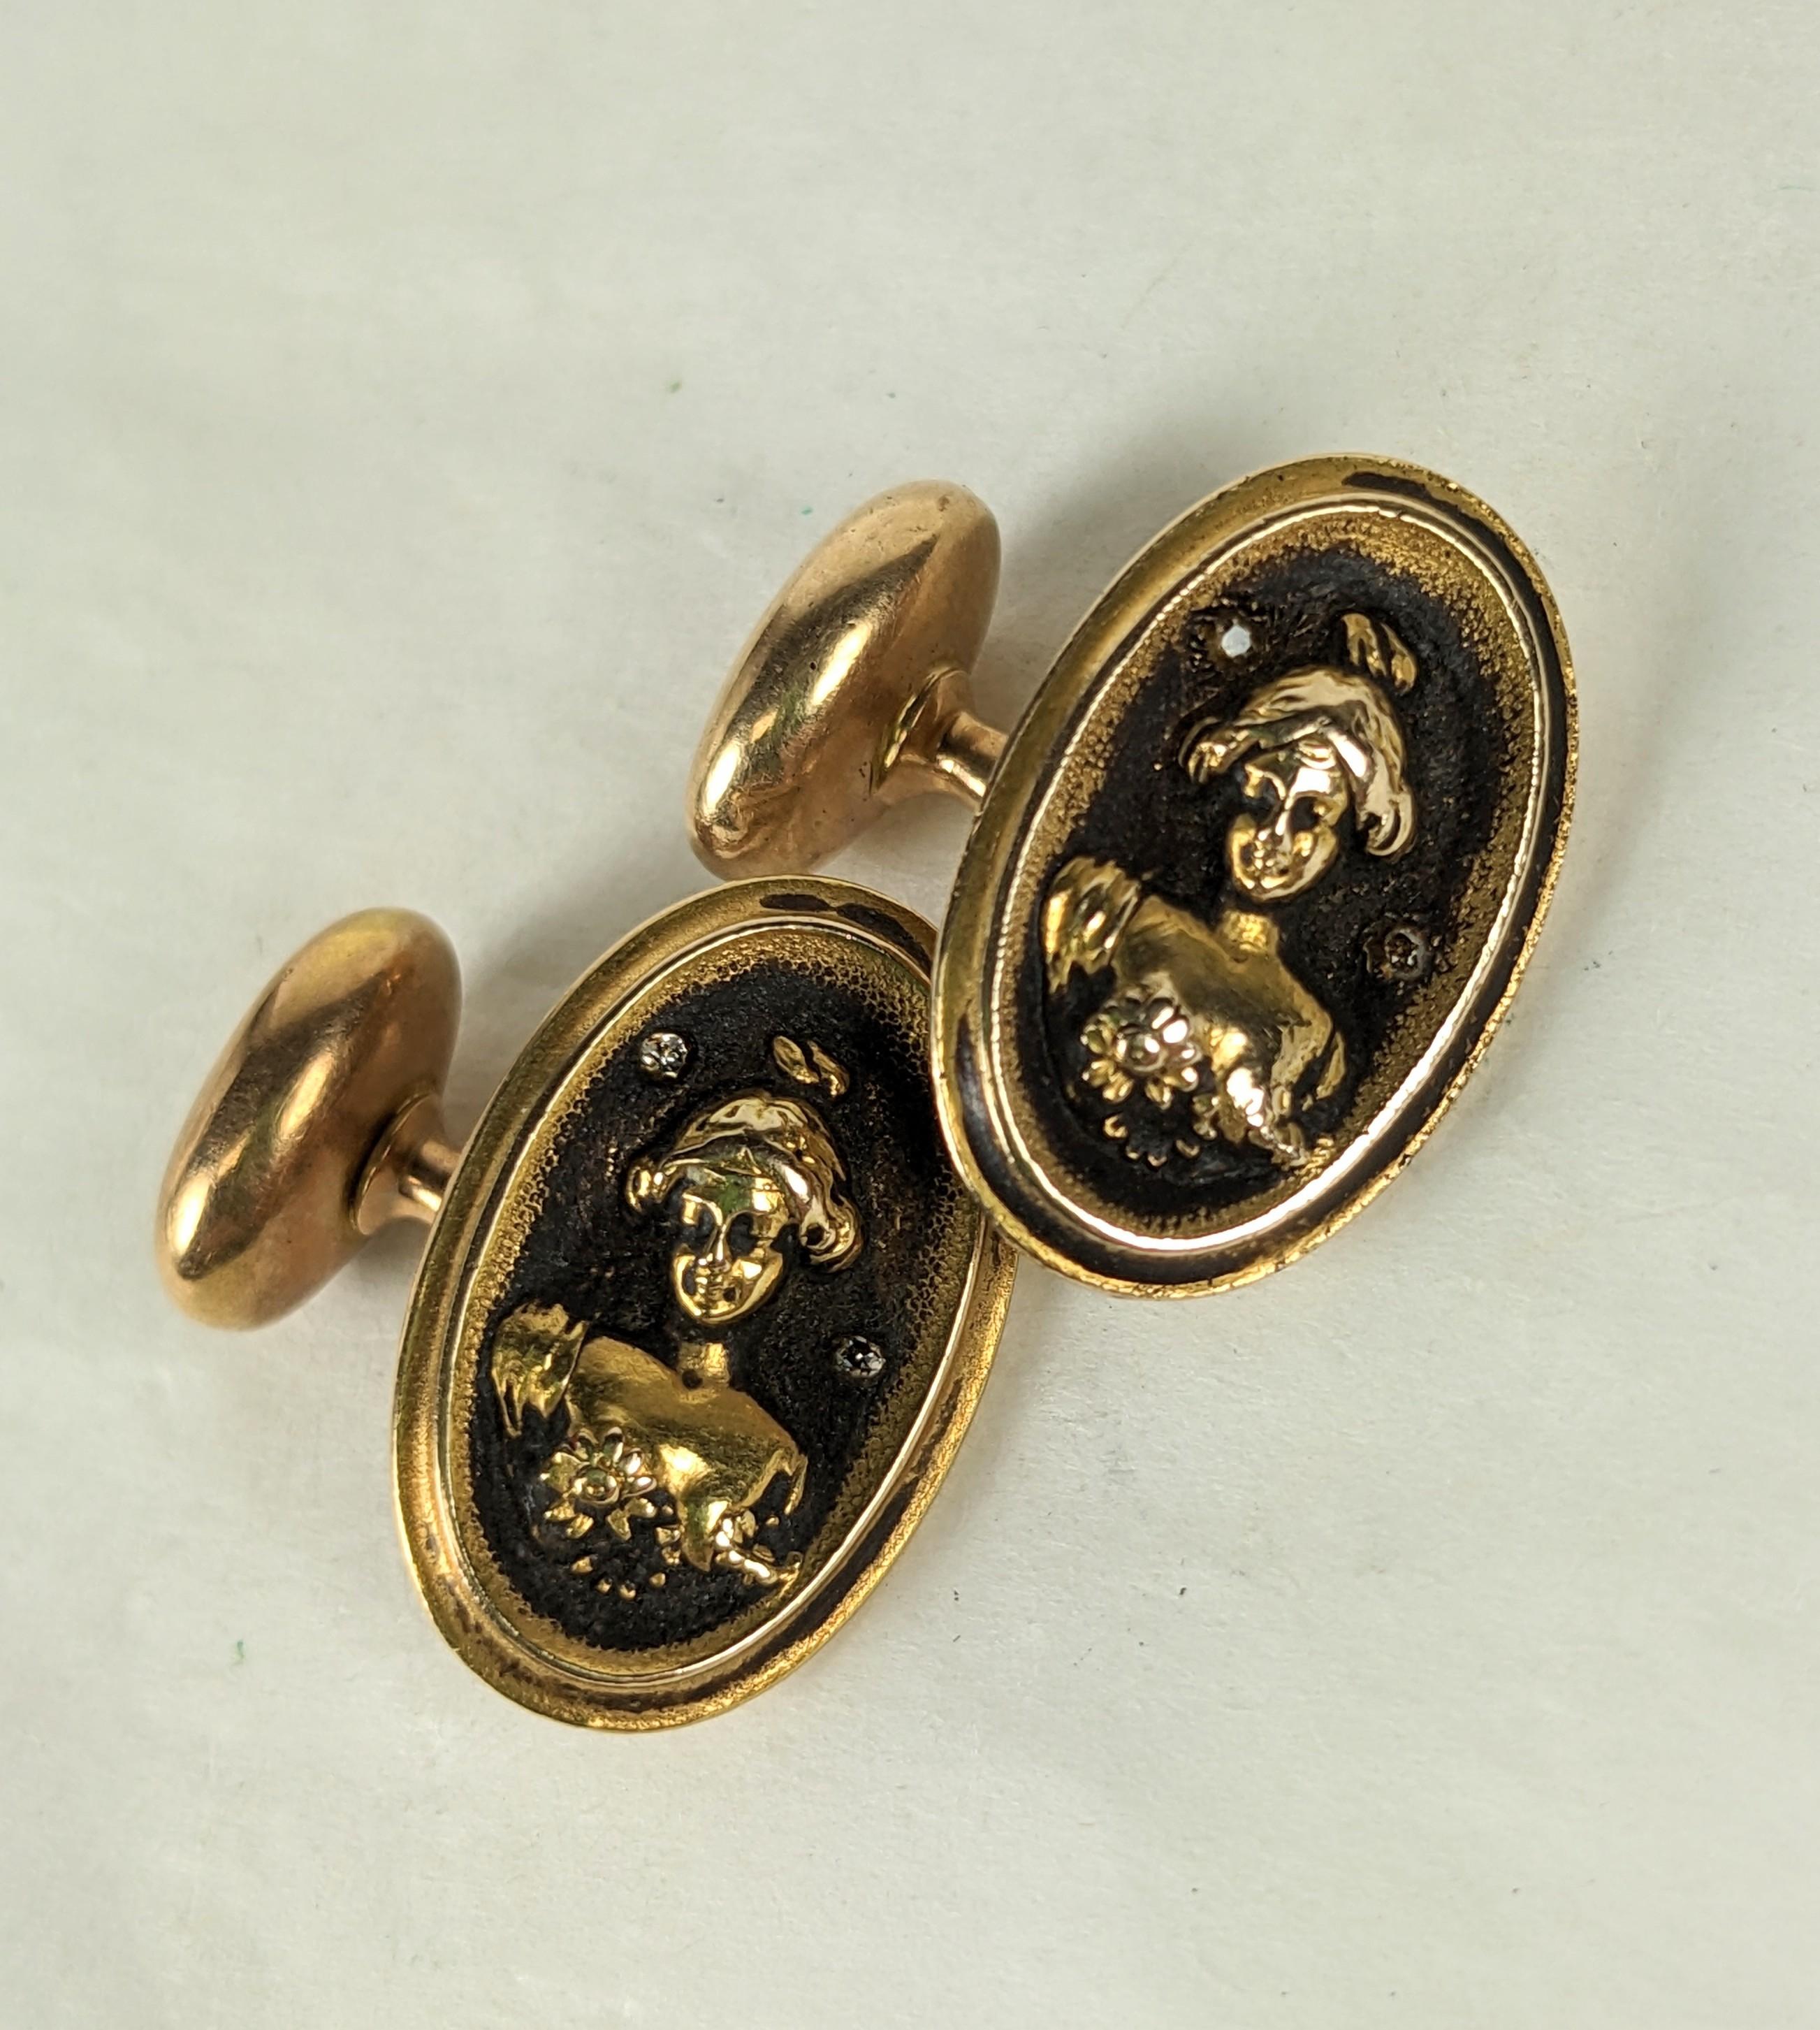 14k Art Nouveau Maiden Cufflinks from the early 20th Century. Hard shank links with maiden set with 2 tiny diamond accents on each face. The gold is patinaed to highlight her form. 1900 USA. 
Marked 14K. Face .75